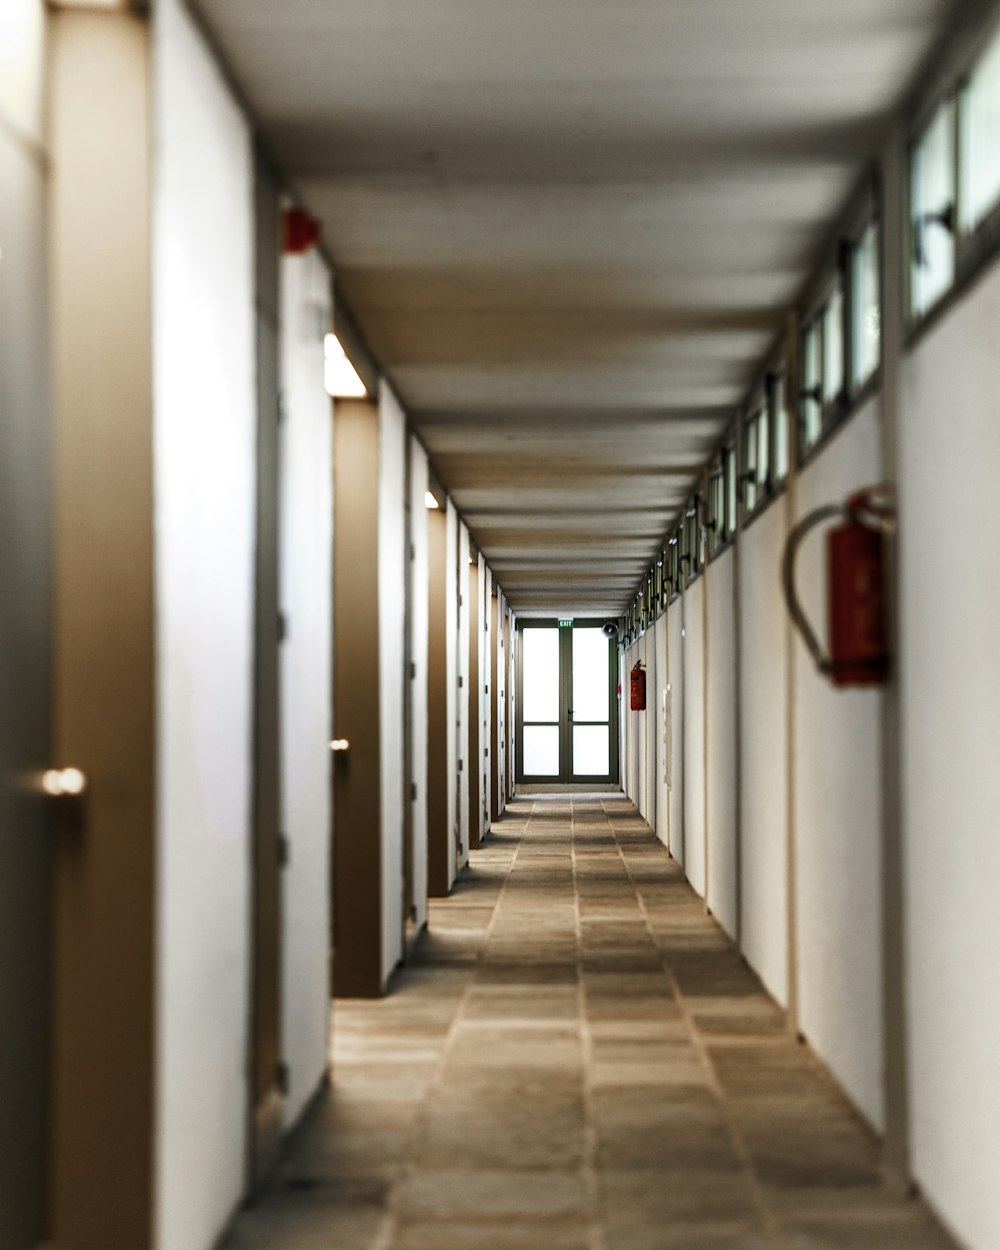 white hallway with red fire extinguisher